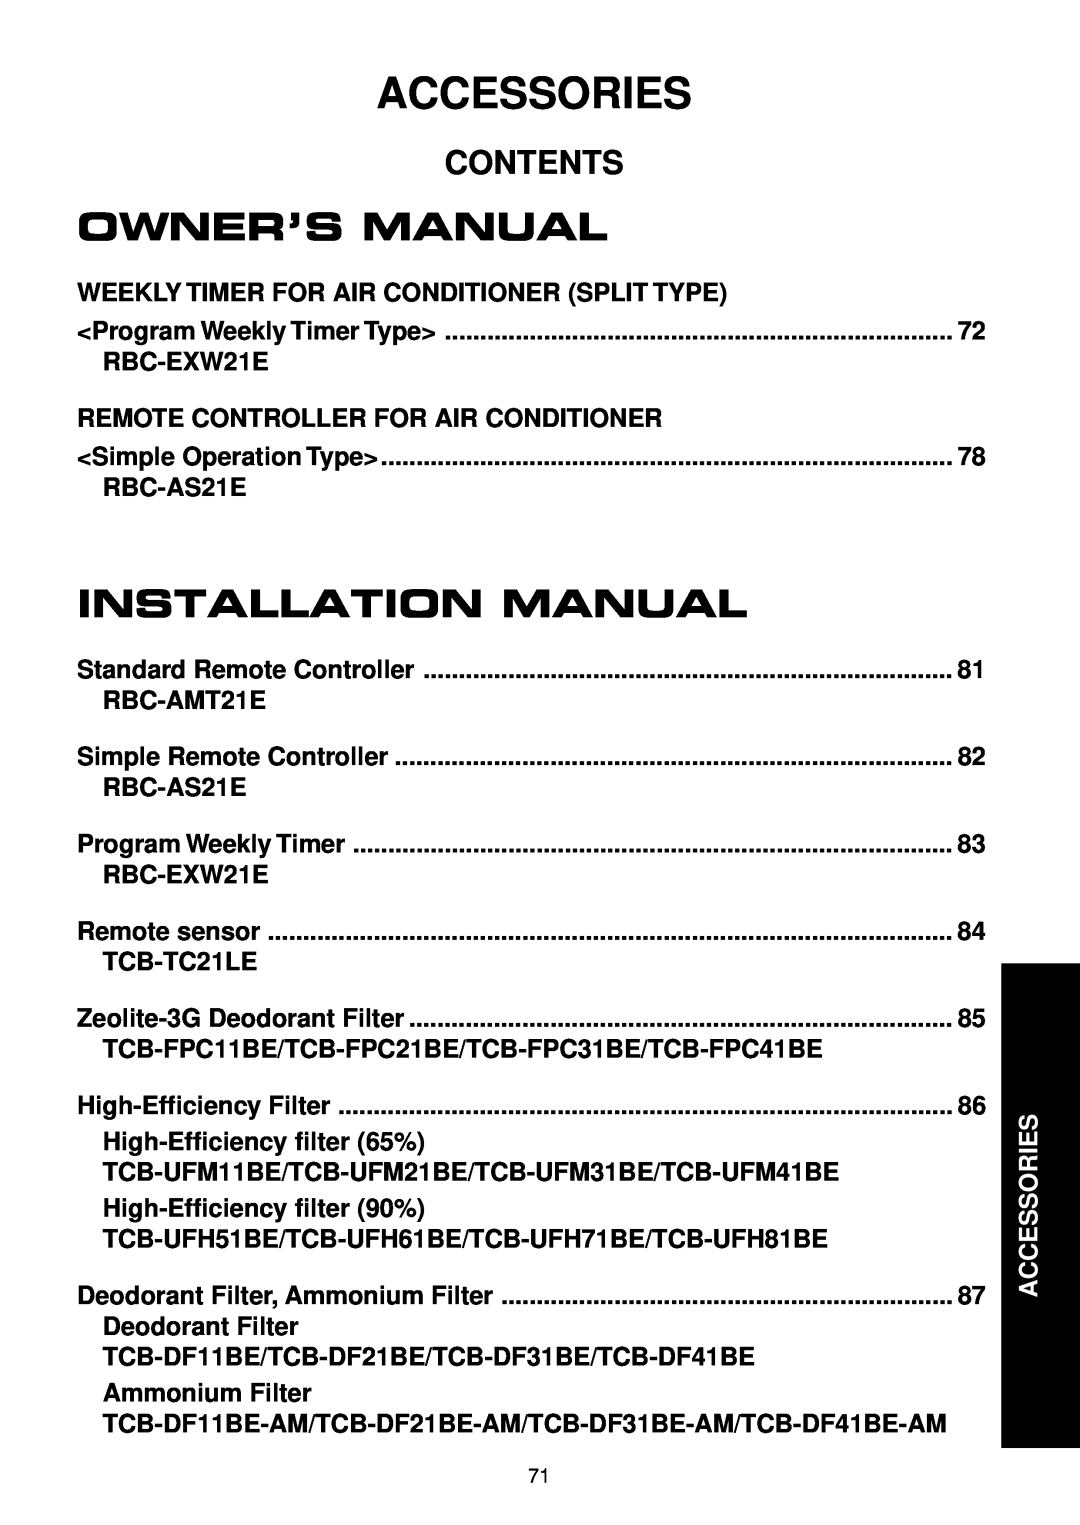 Toshiba R410A service manual Accessories, Contents, Owner’S Manual, Installation Manual 